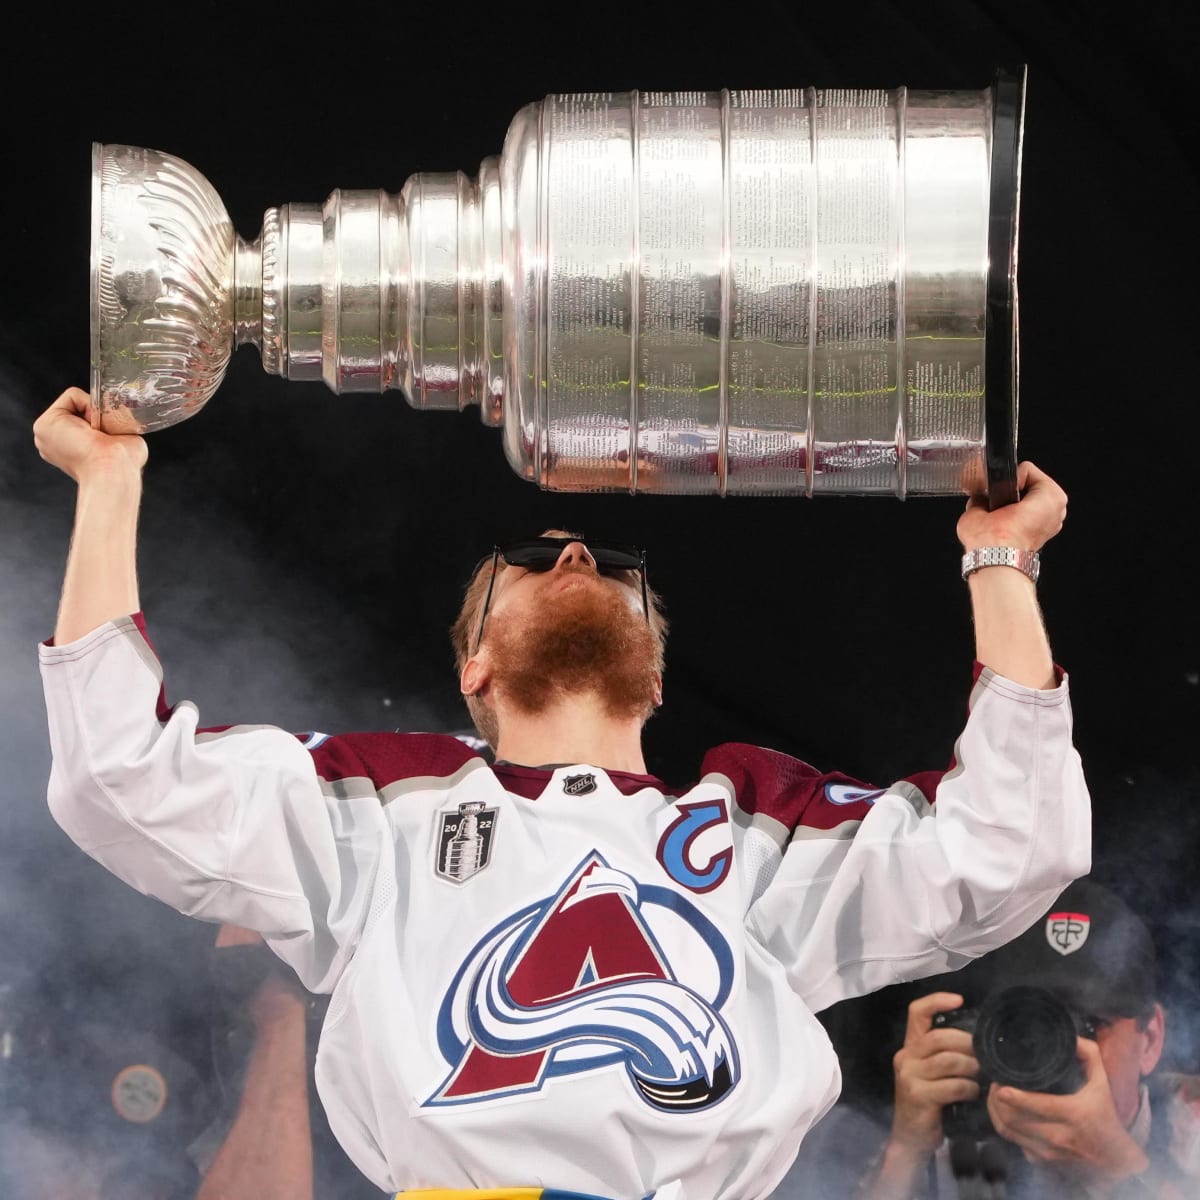 State Your Case: Can the Avalanche repeat as Stanley Cup champions